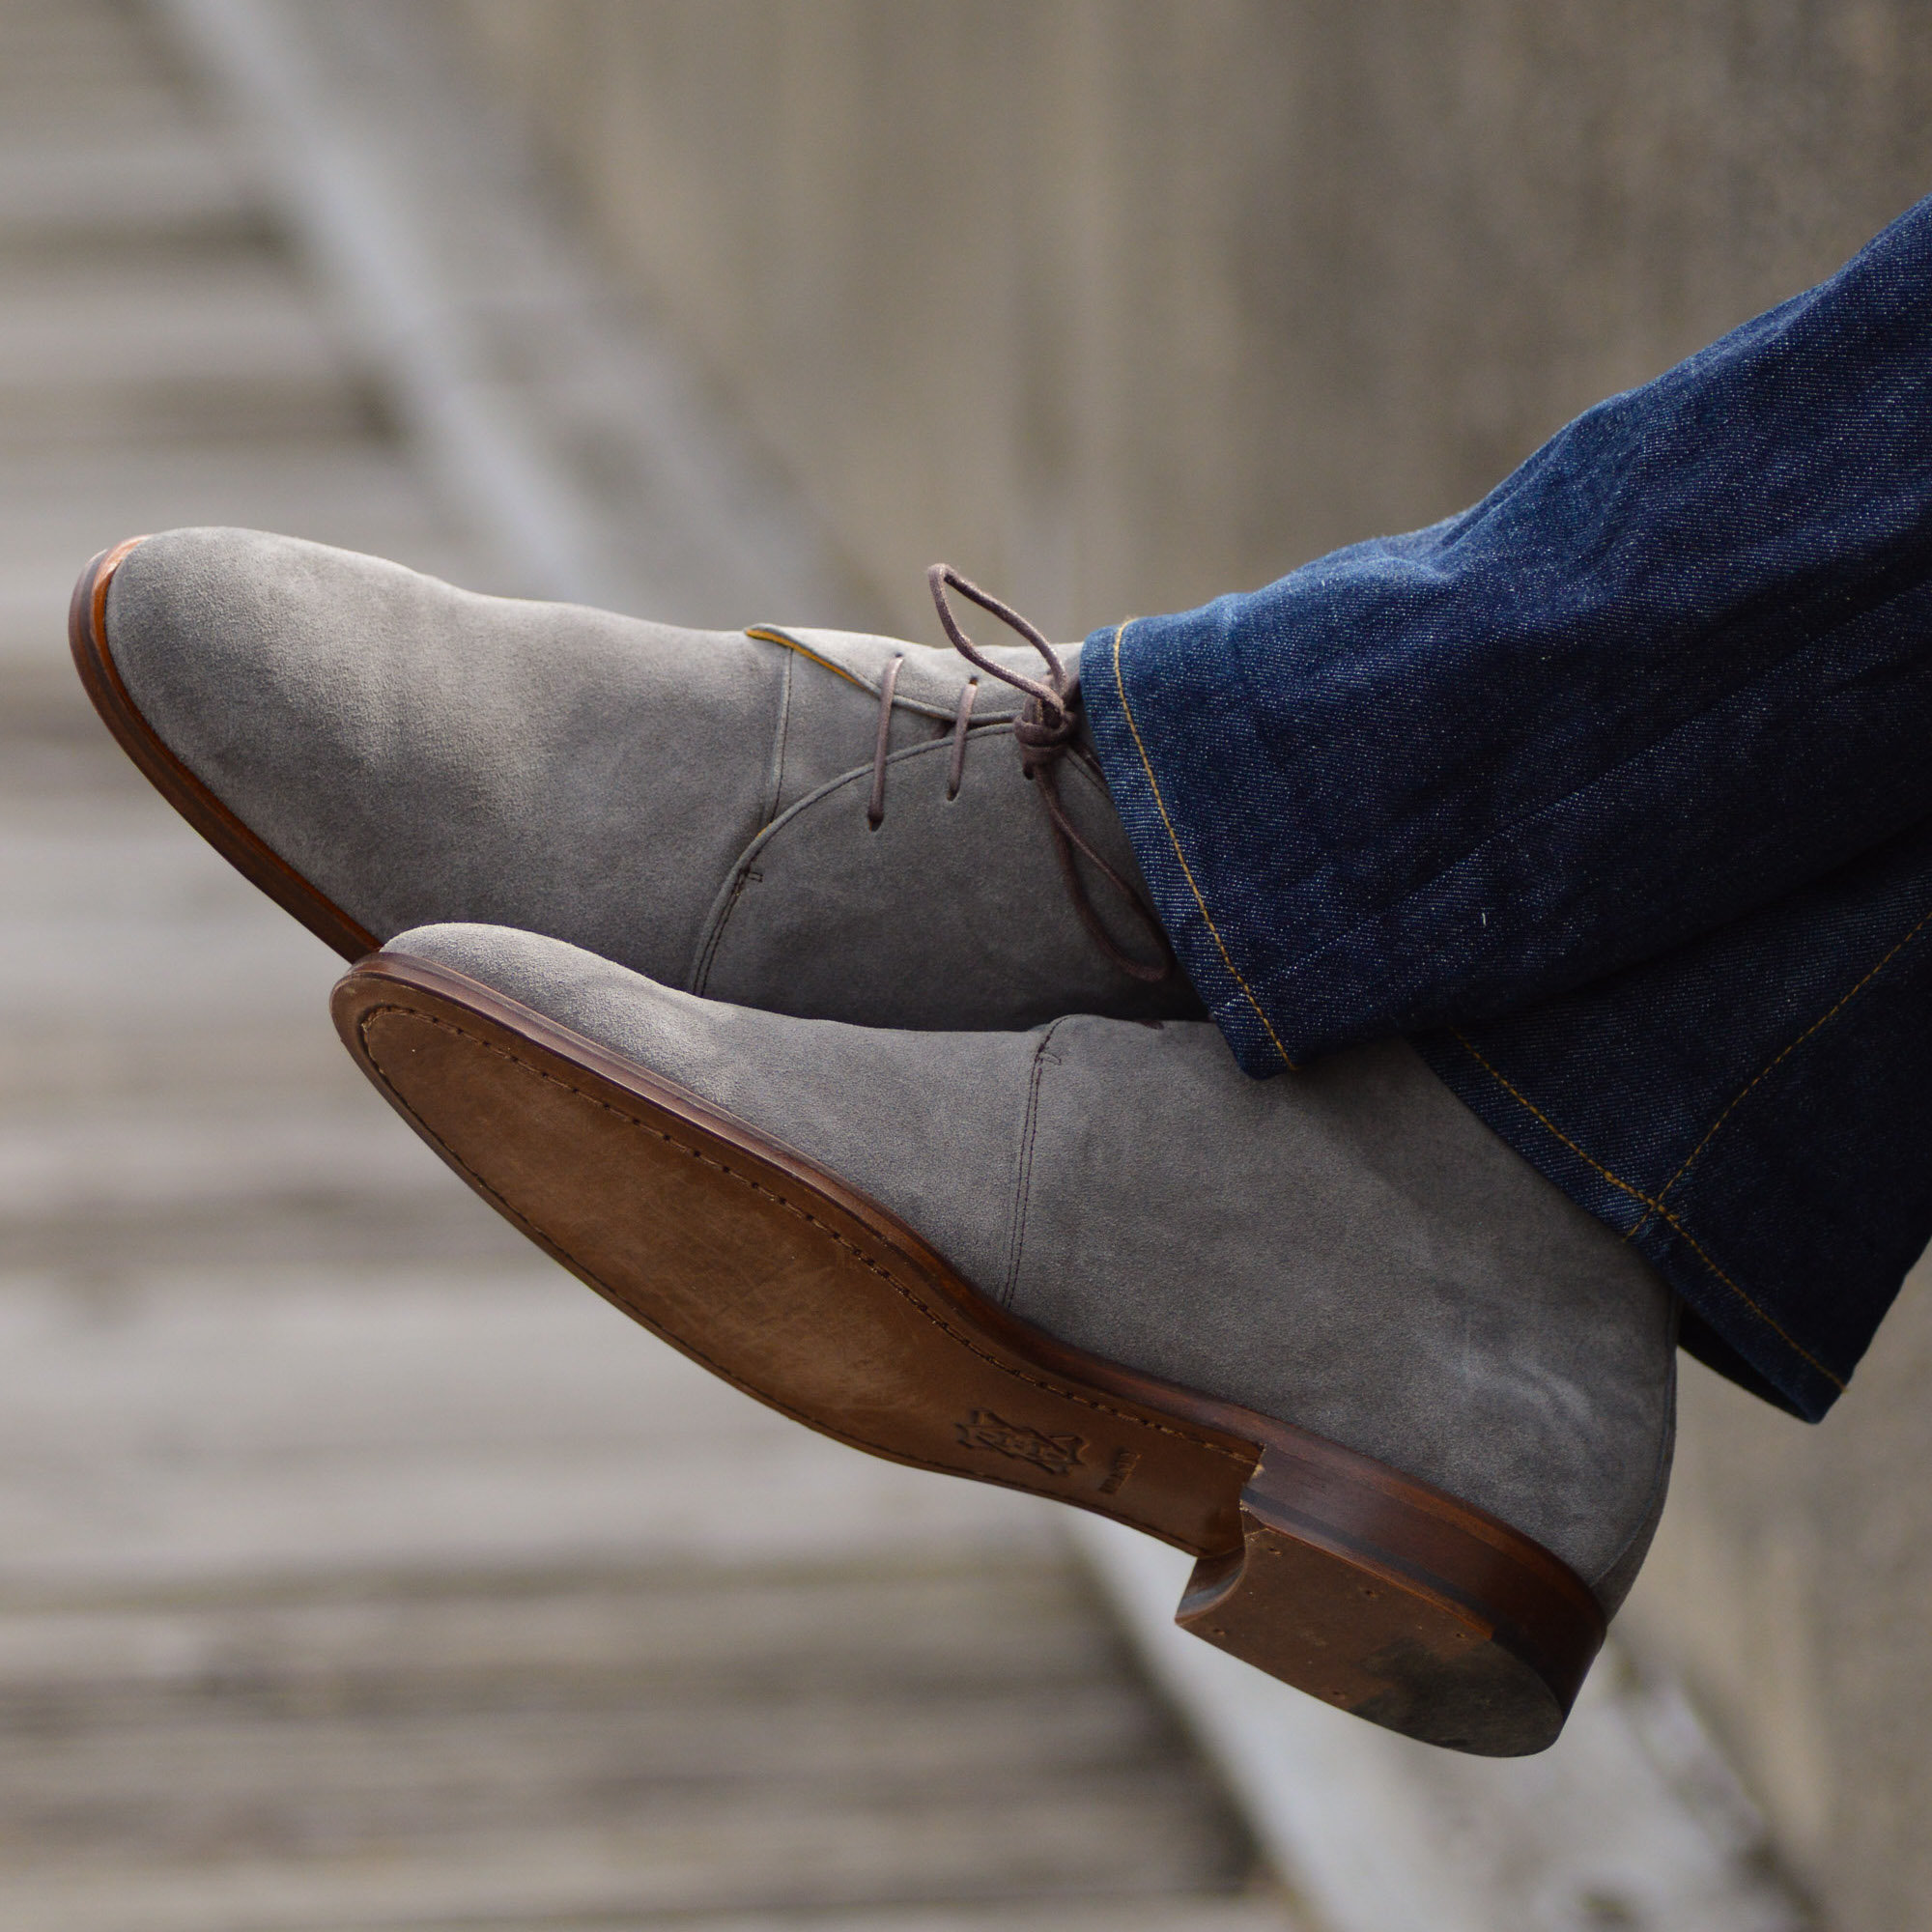 Undandy Shoes Review | Affordable Custom Shoes - The Modest Man